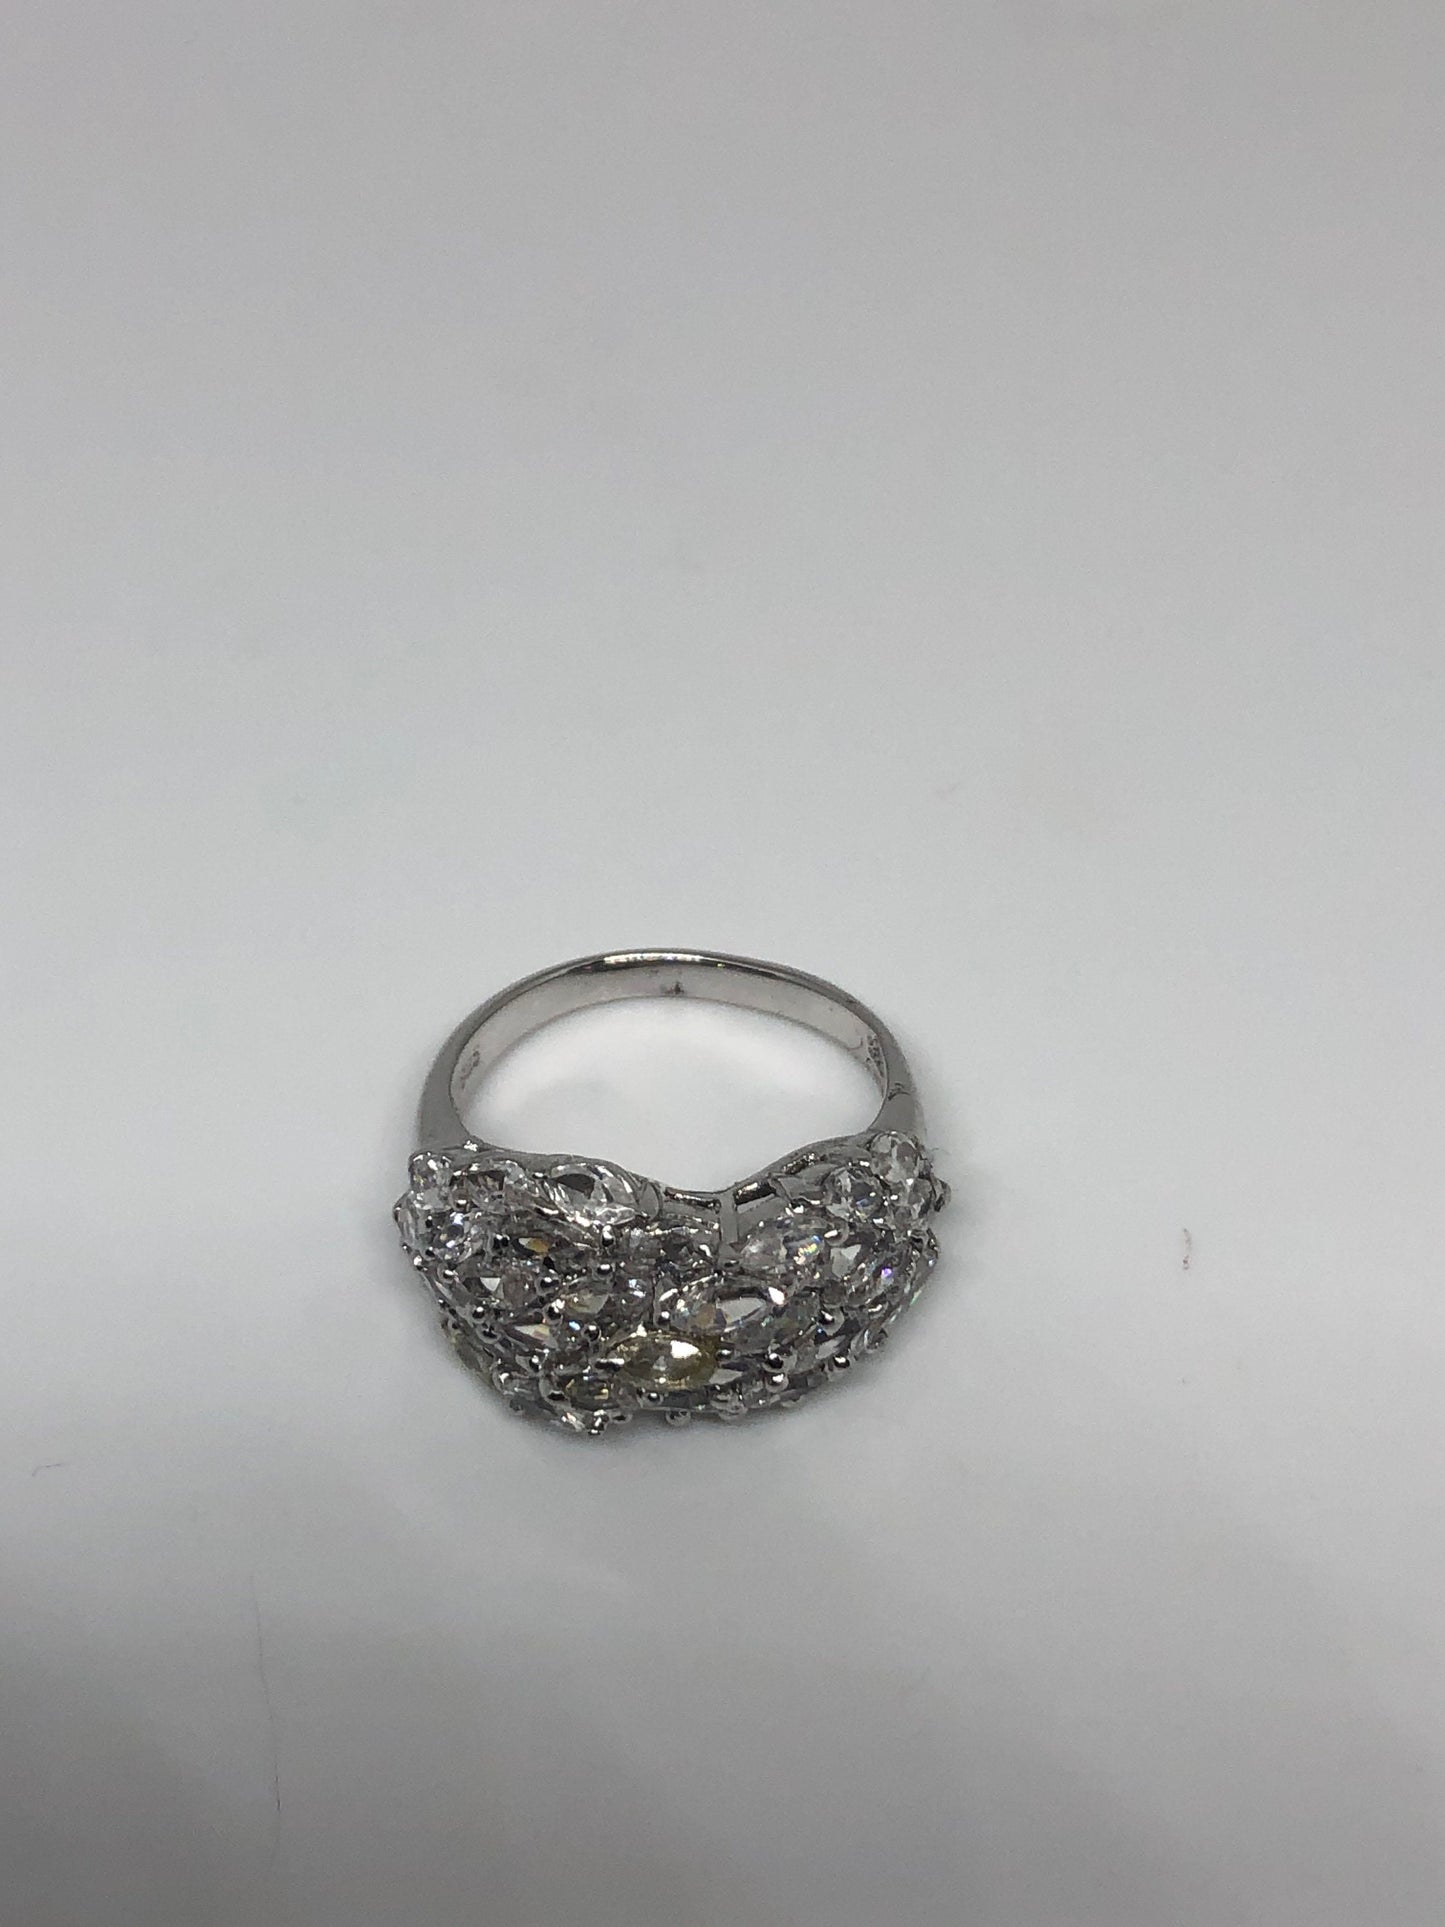 Vintage Clear White Sapphire 925 Sterling Silver Cocktail Ring Size 6